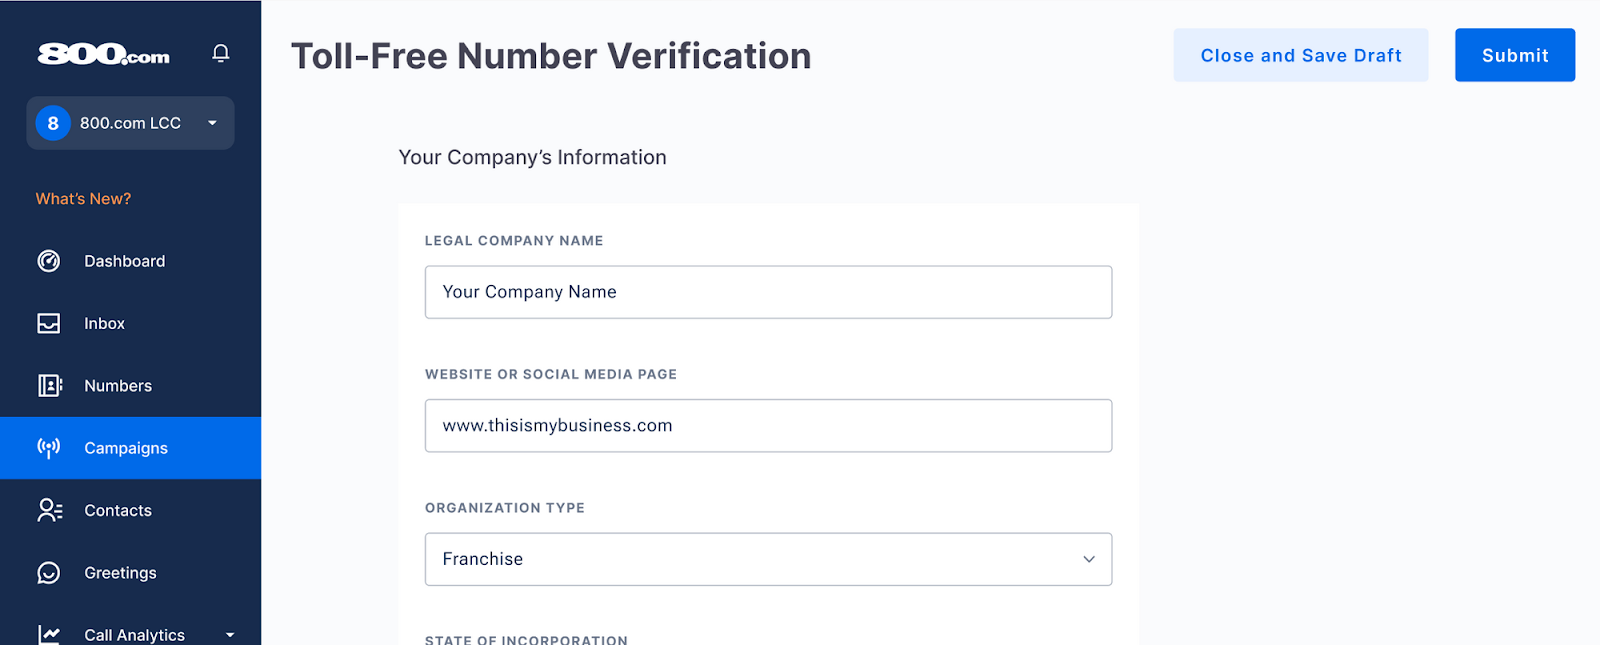 verify your number step 3